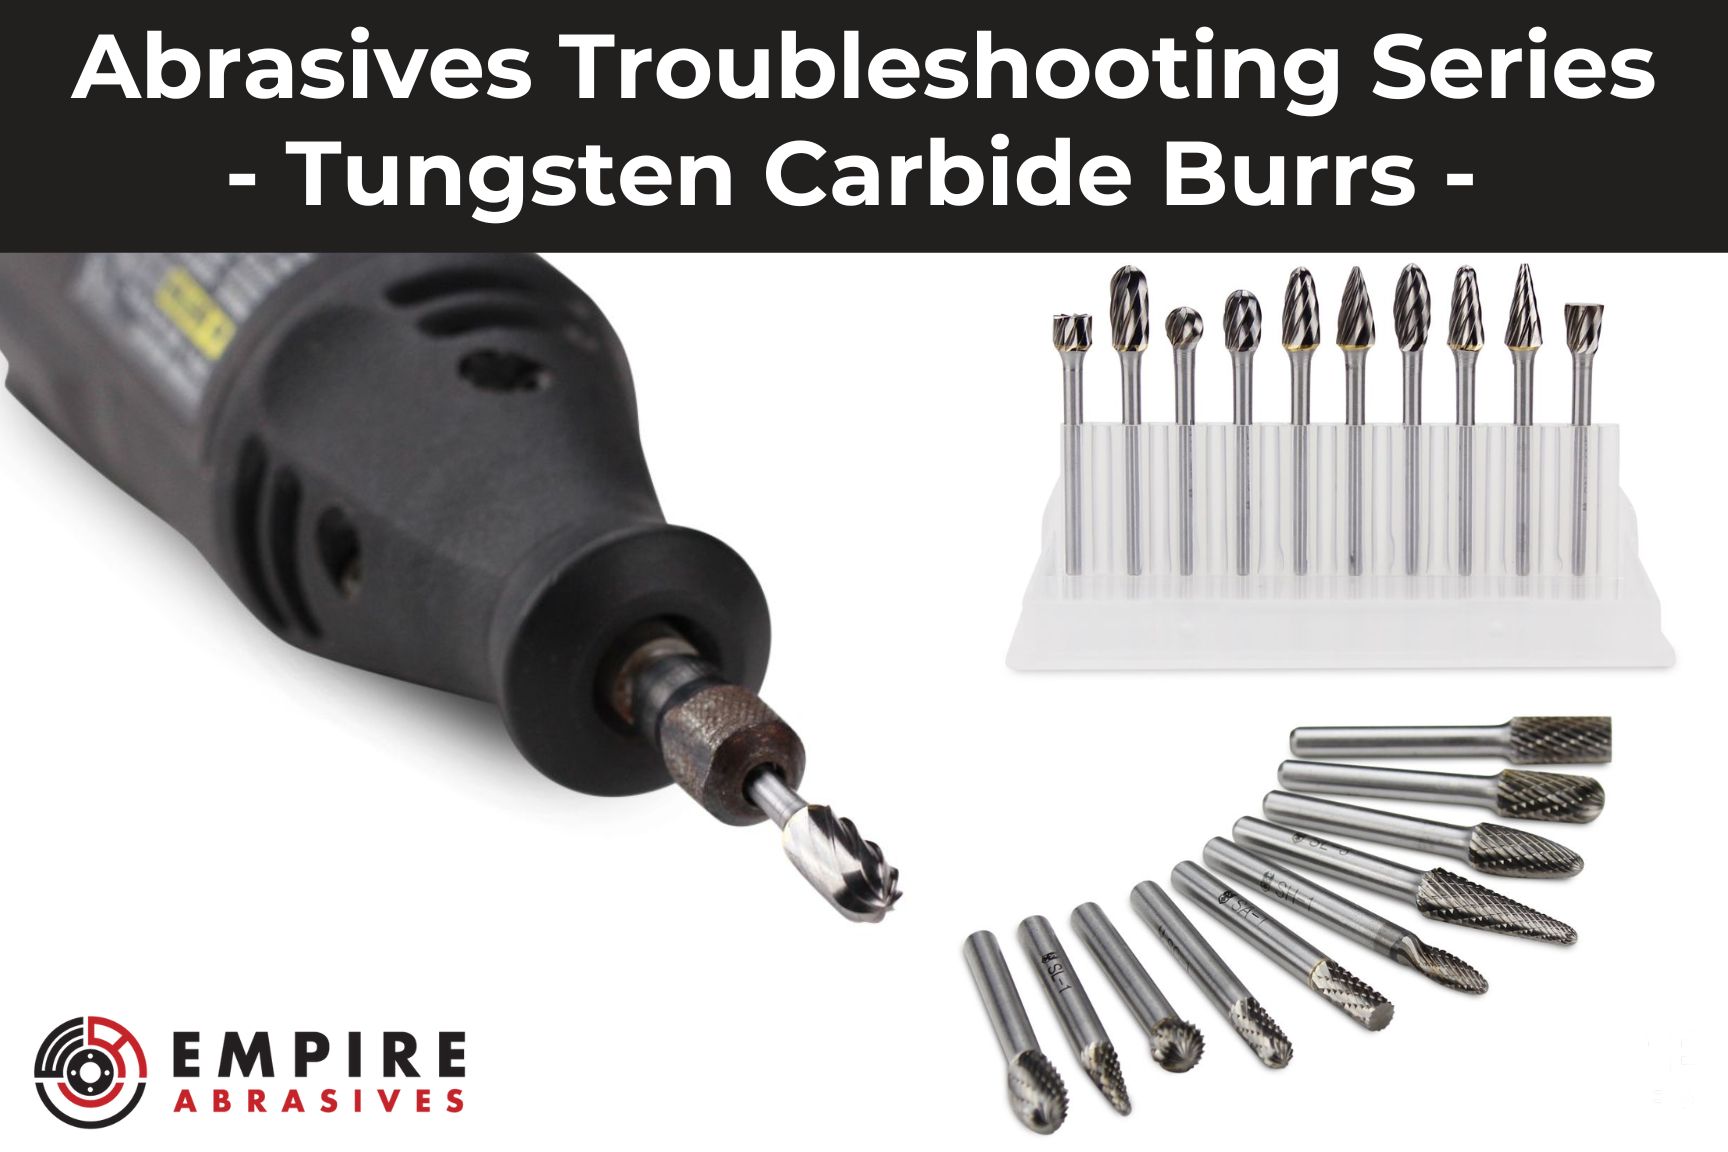 Troubleshooting Common Abrasive Tool Issues - Tungsten Carbide Burrs - ultimate guide blog post by Empire Abrasives